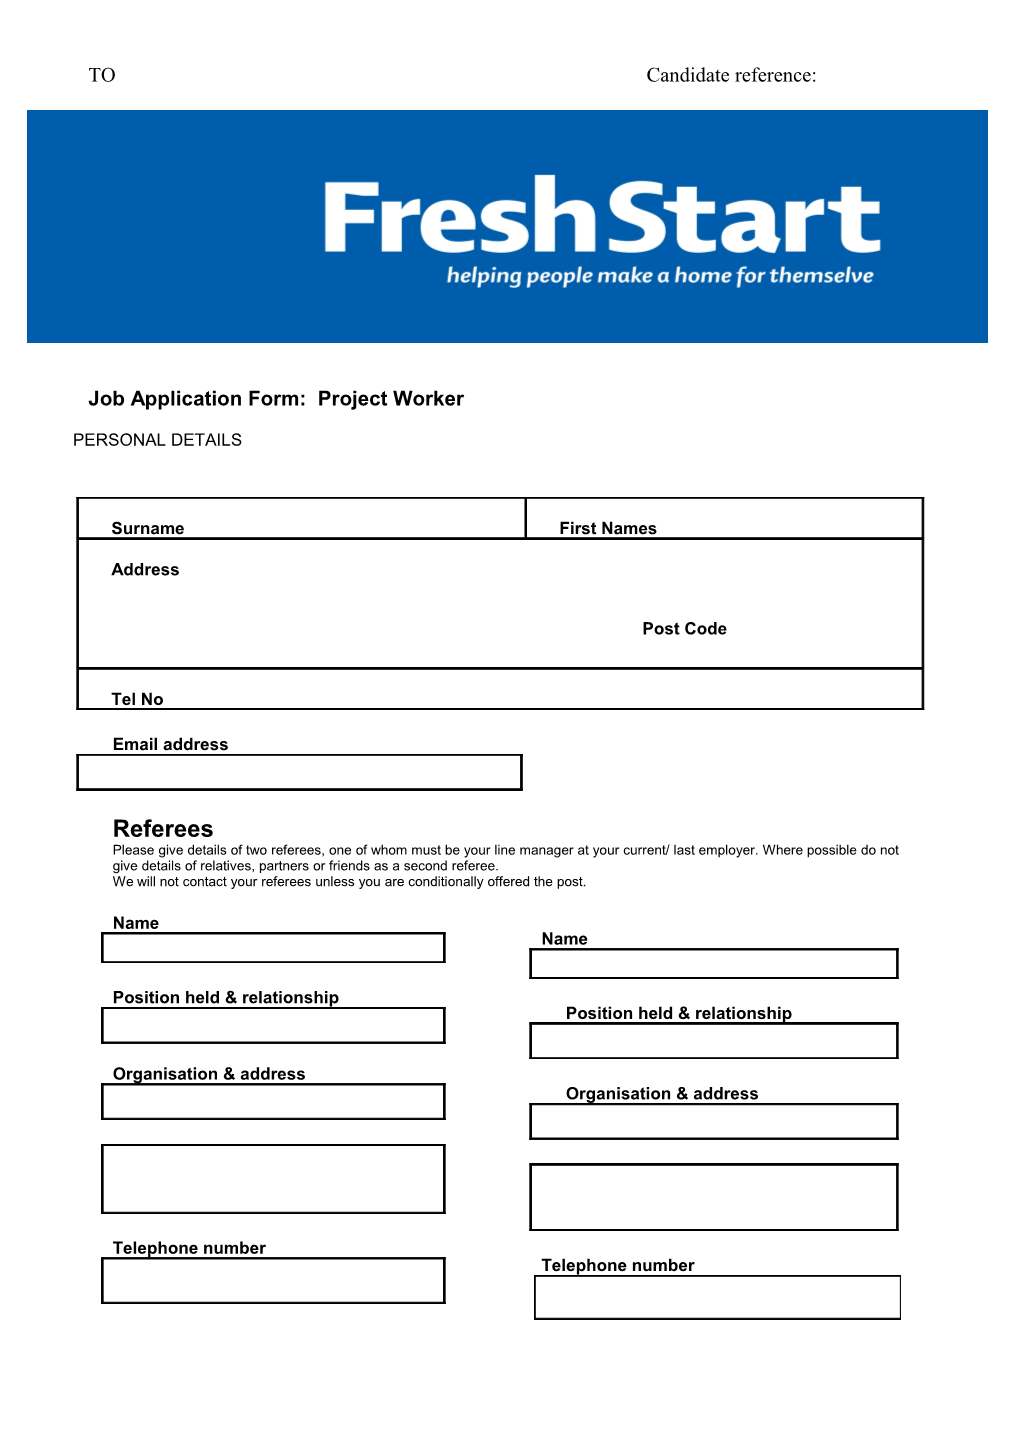 Job Application Form: Project Worker